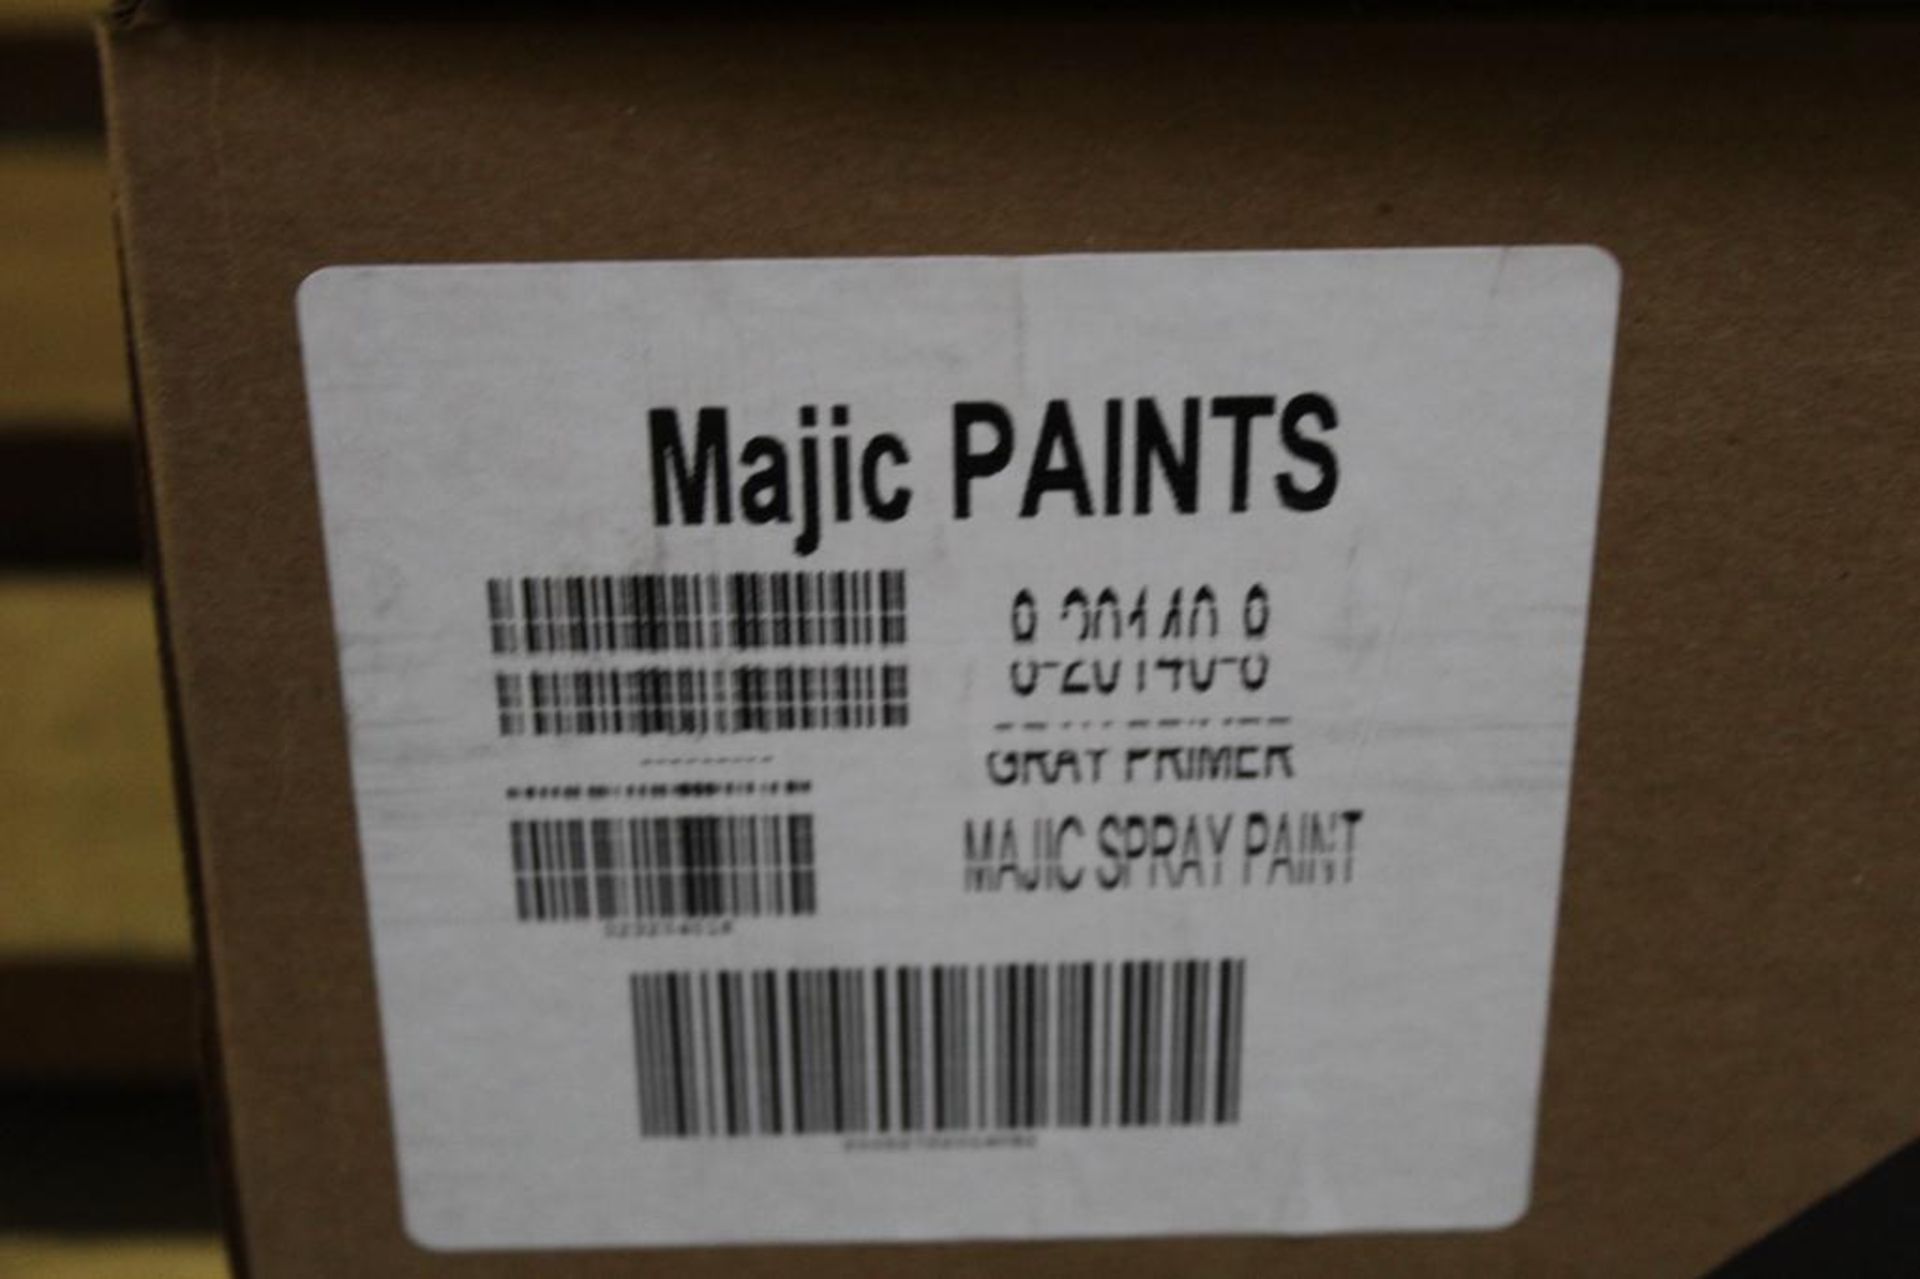 Lot of (12) Cases (6 Per Case) of Mavic Paints Gray Primer Spray Paint Product # 8-20140-8 - Image 4 of 4